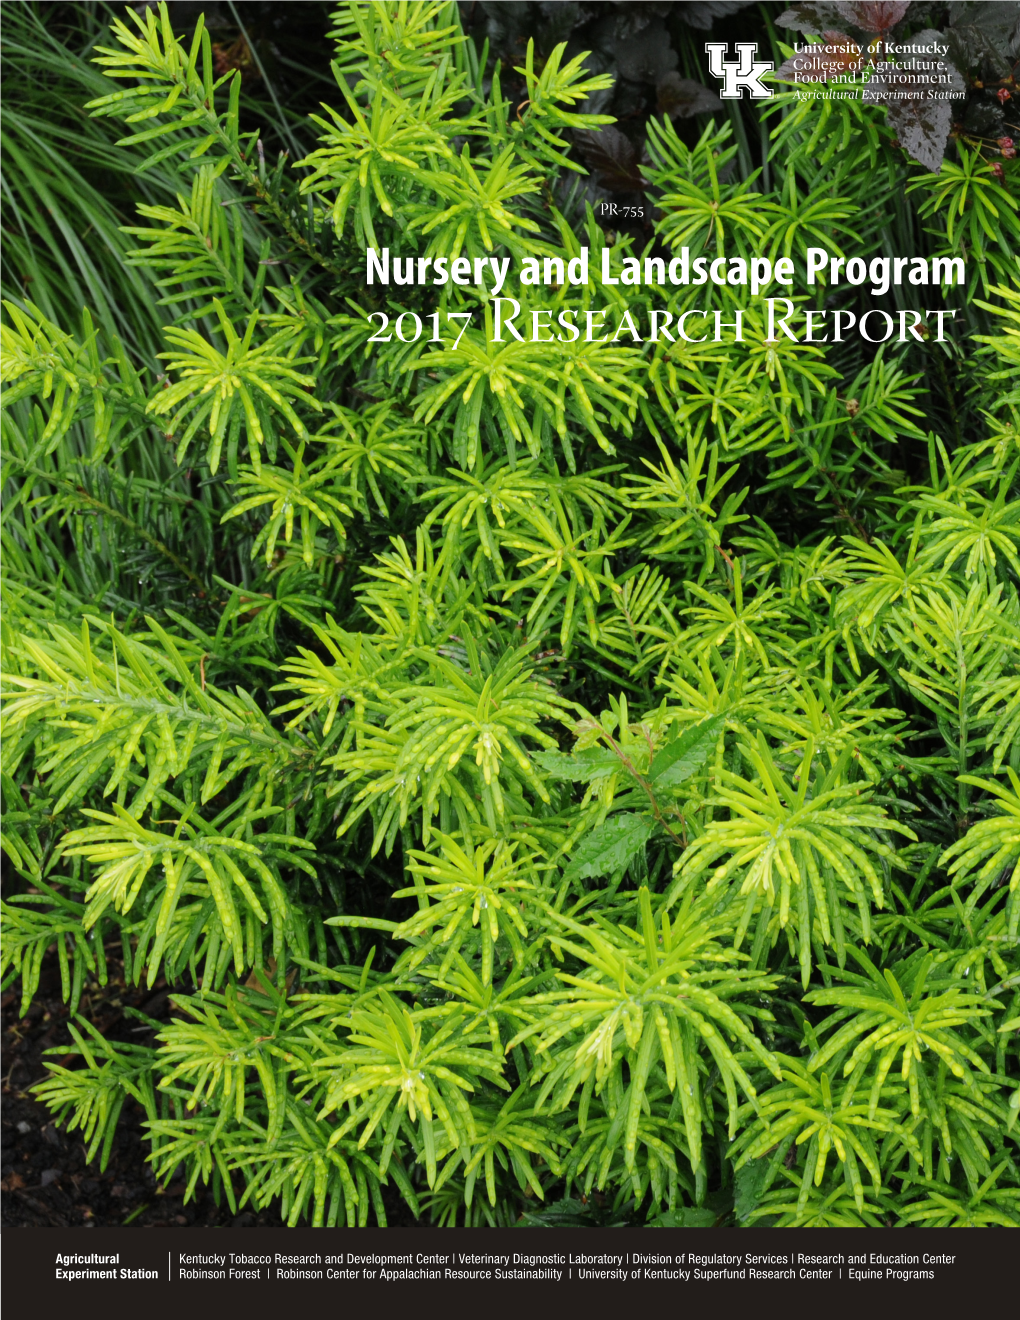 PR-755: 2017 Nursery and Landscape Research Report